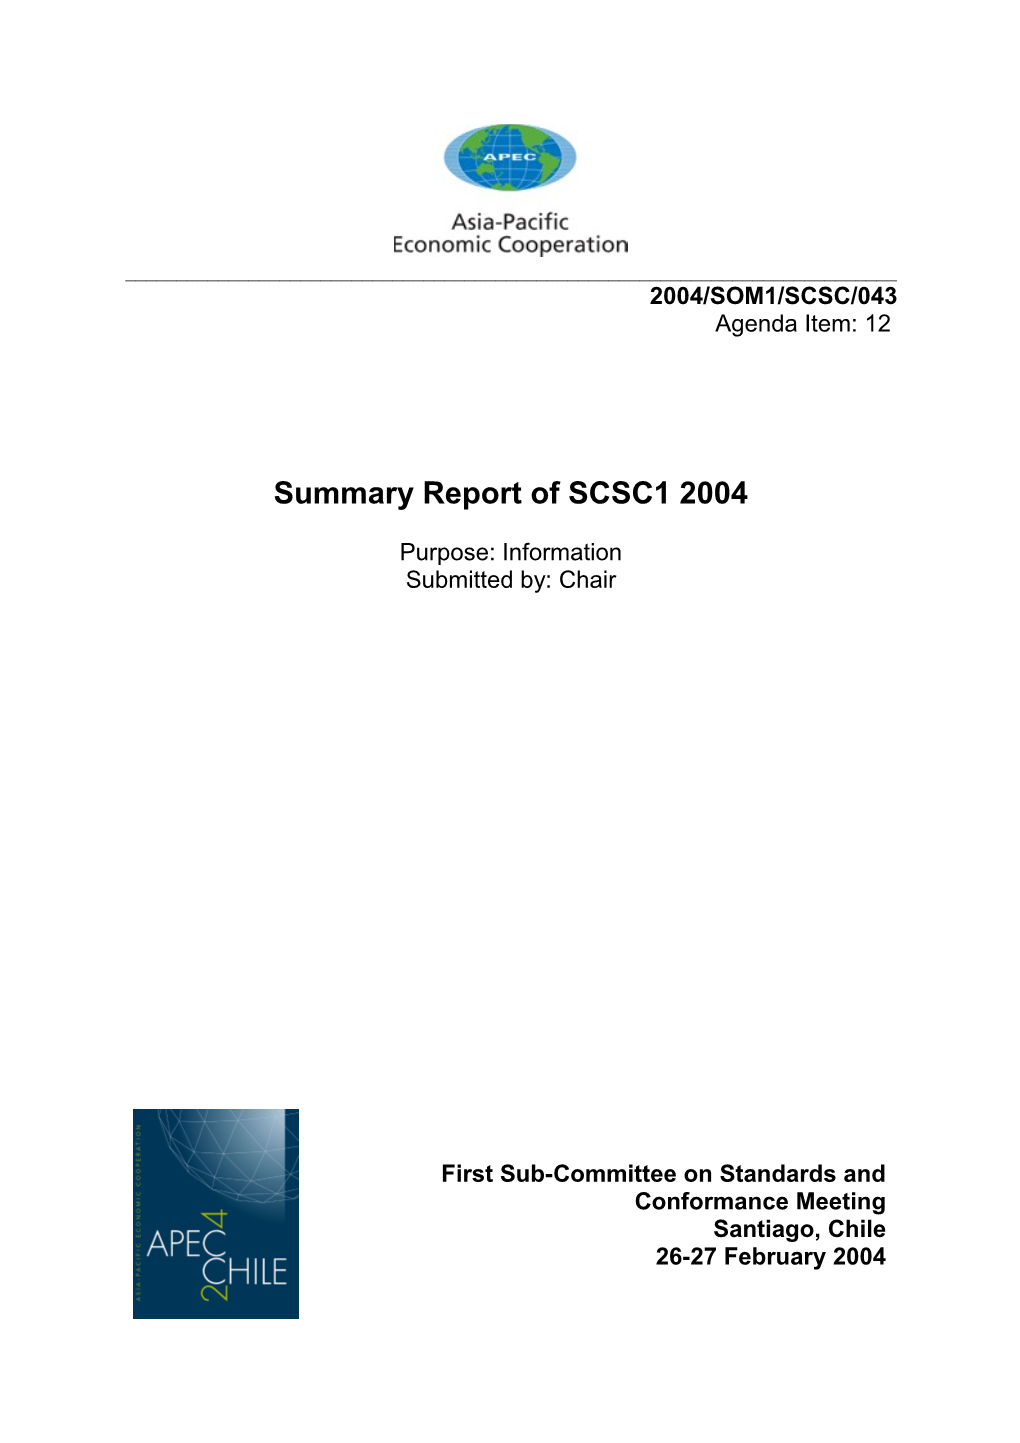 Summary Report of SCSC1 2004